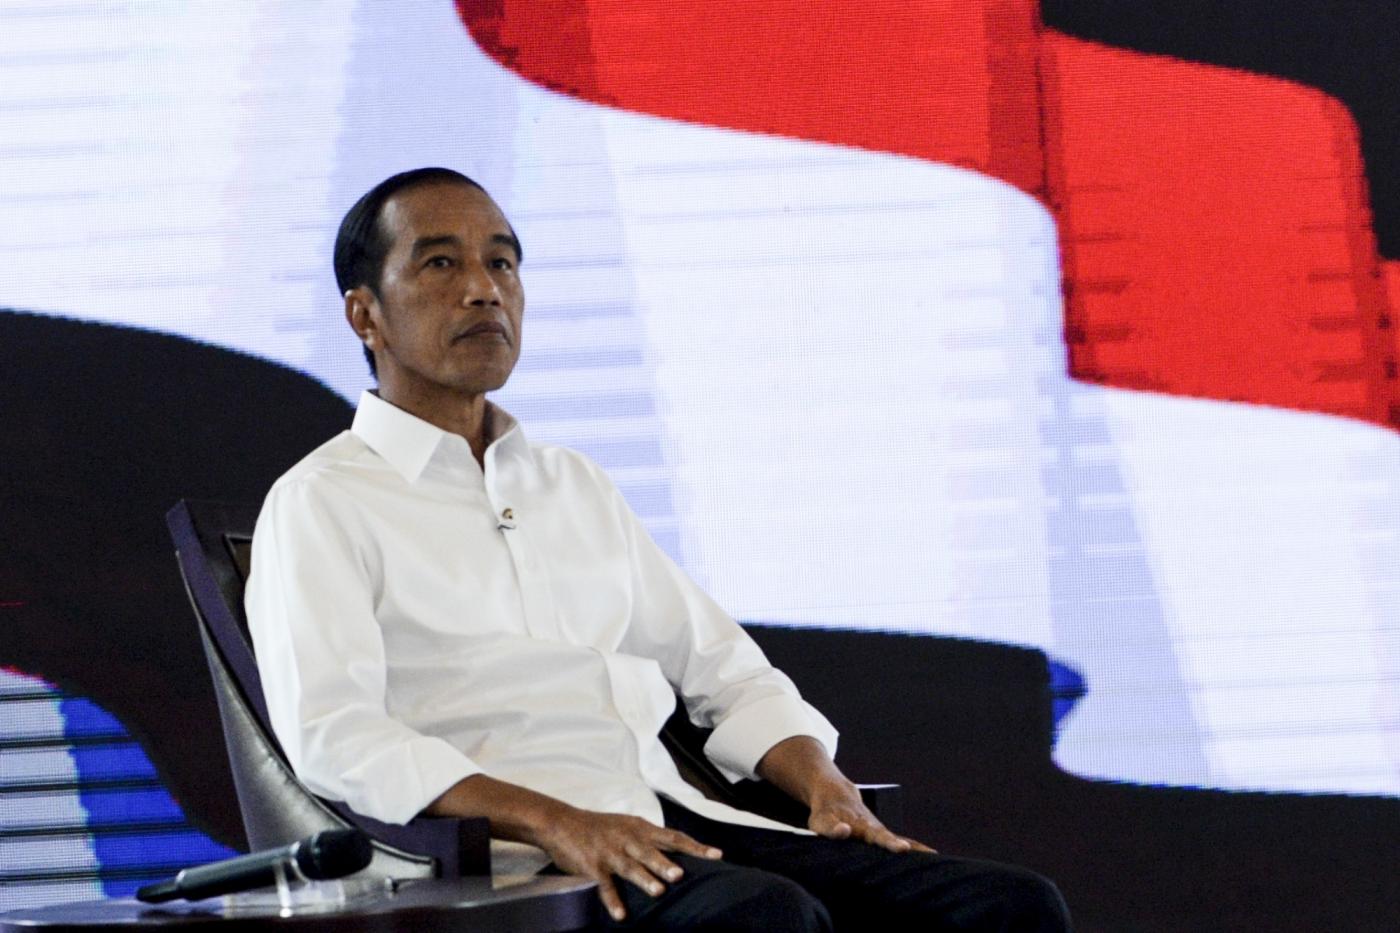 JAKARTA, March 30, 2019 (Xinhua) -- Indonesian presidential candidate and incumbent President Joko Widodo attends the fourth debate in Jakarta, Indonesia, March 30, 2019. Indonesia will hold its presidential election in April 2019. (Xinhua/Agung Kuncahya B/IANS) by .